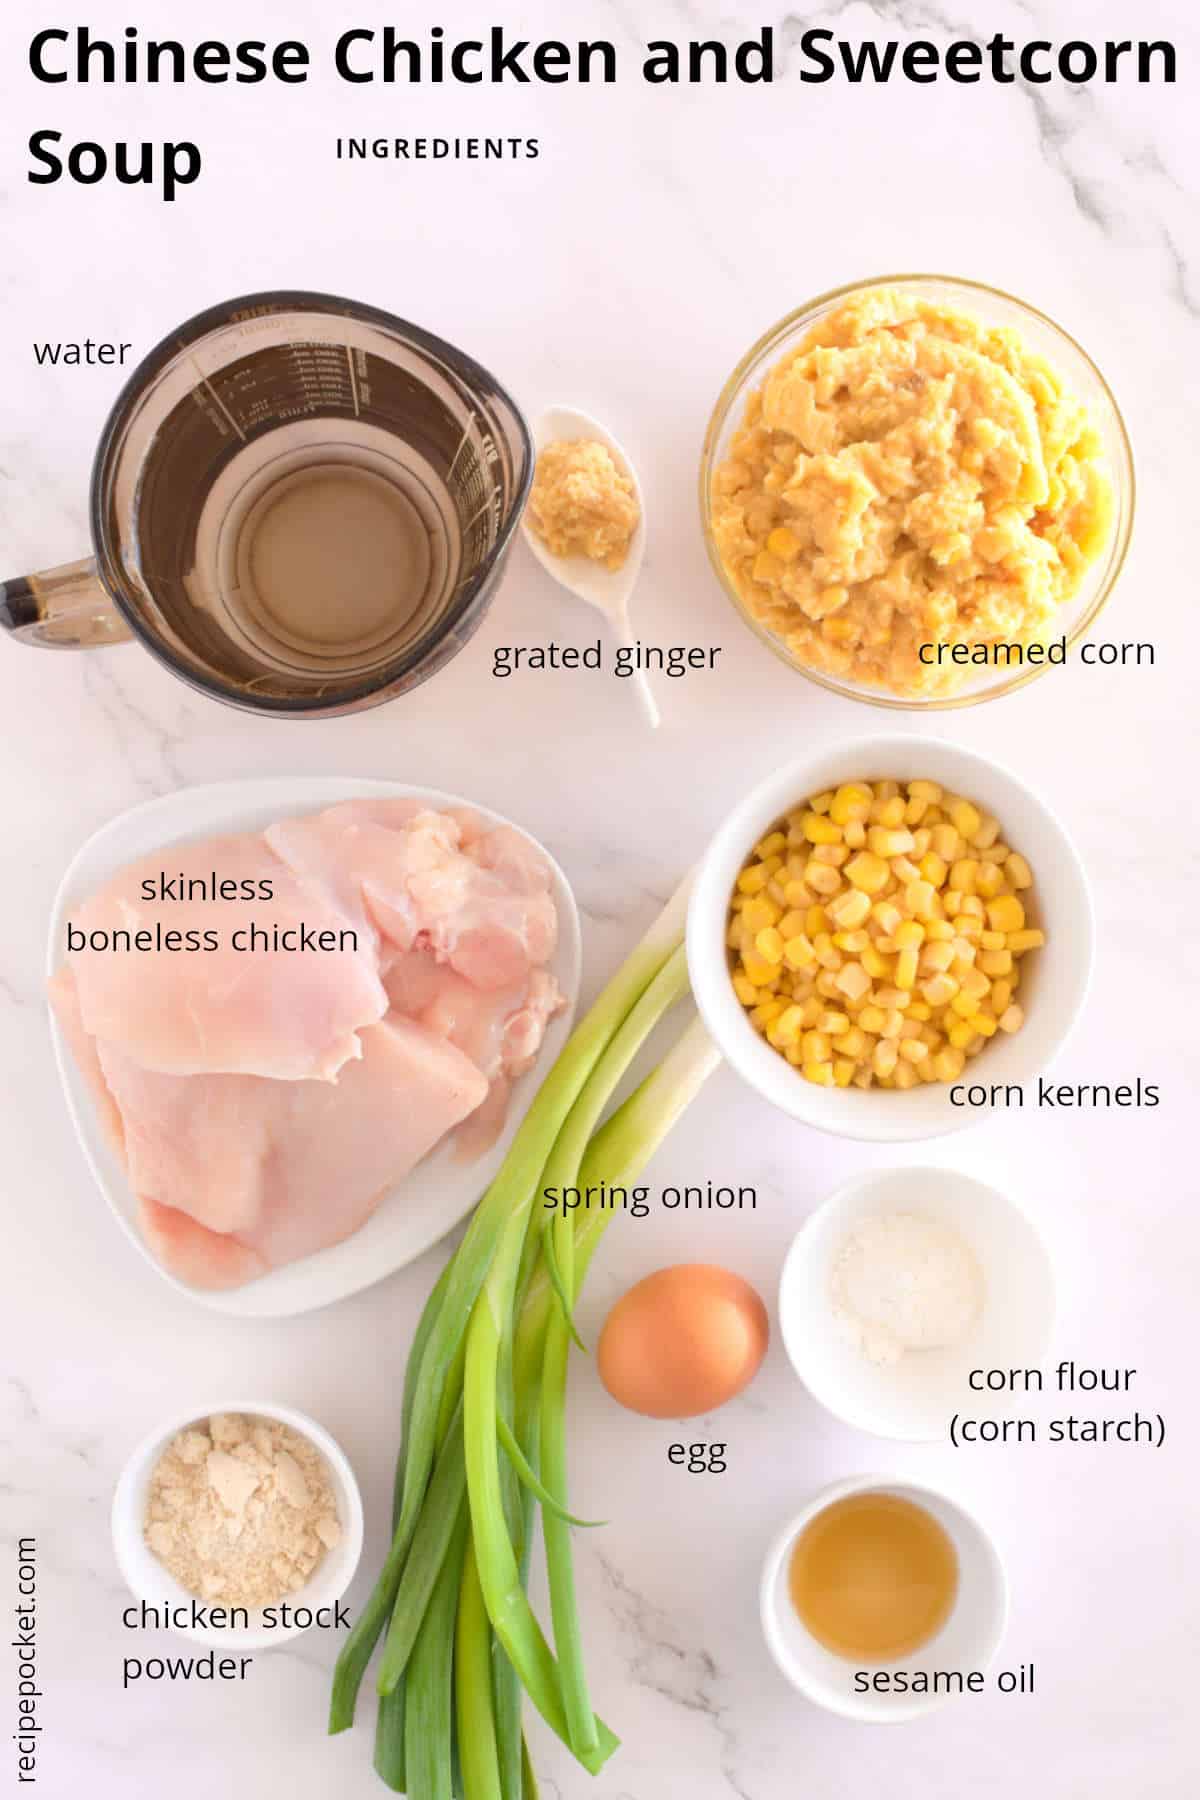 Image showing ingredients for Chinese chicken and sweetcorn soup - slow cooker recipe.